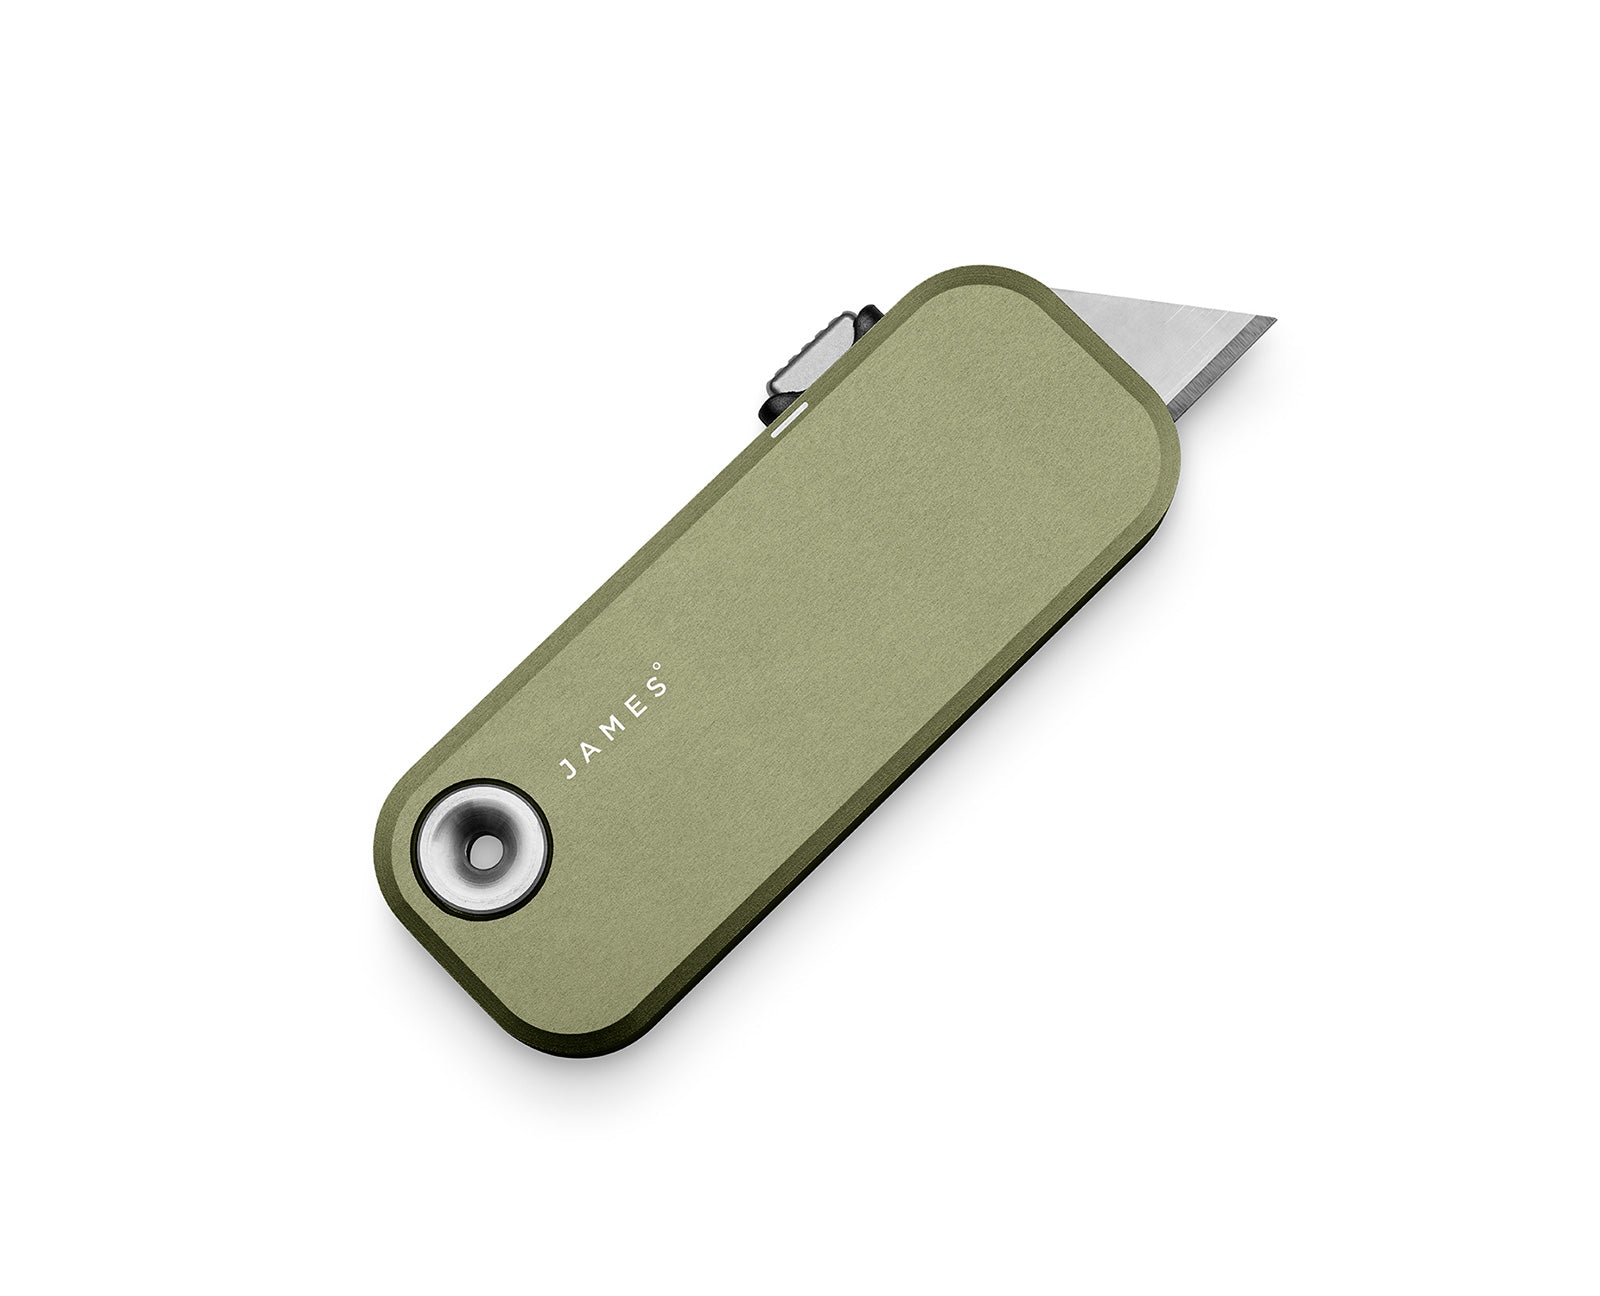 The Palmer knife with OD green colored case.